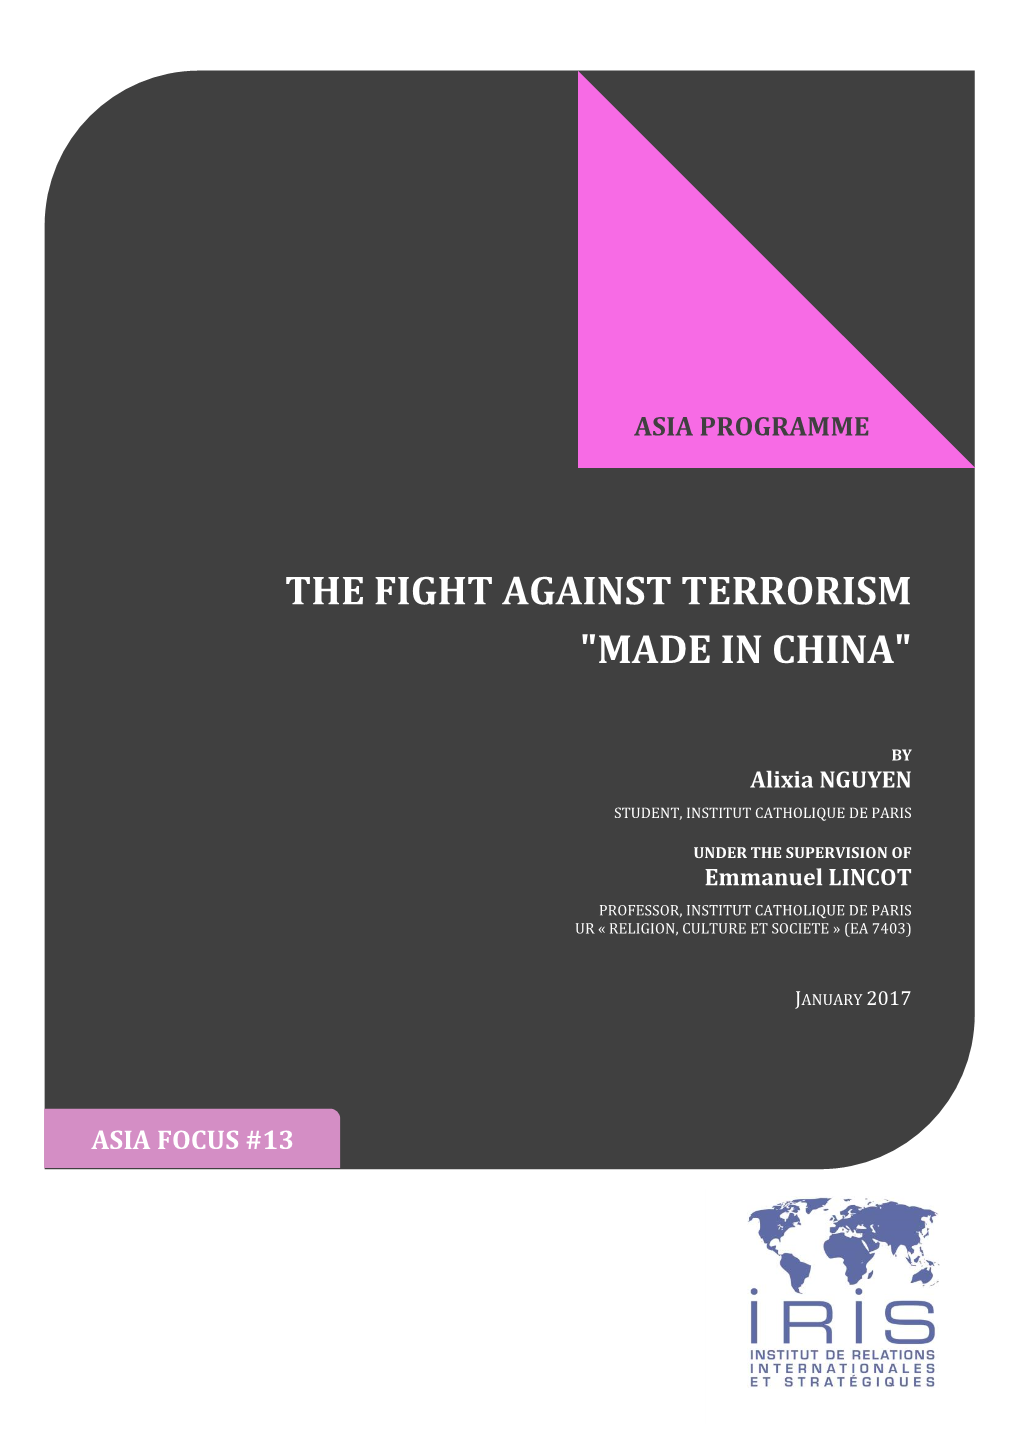 The Fight Against Terrorism "Made in China"